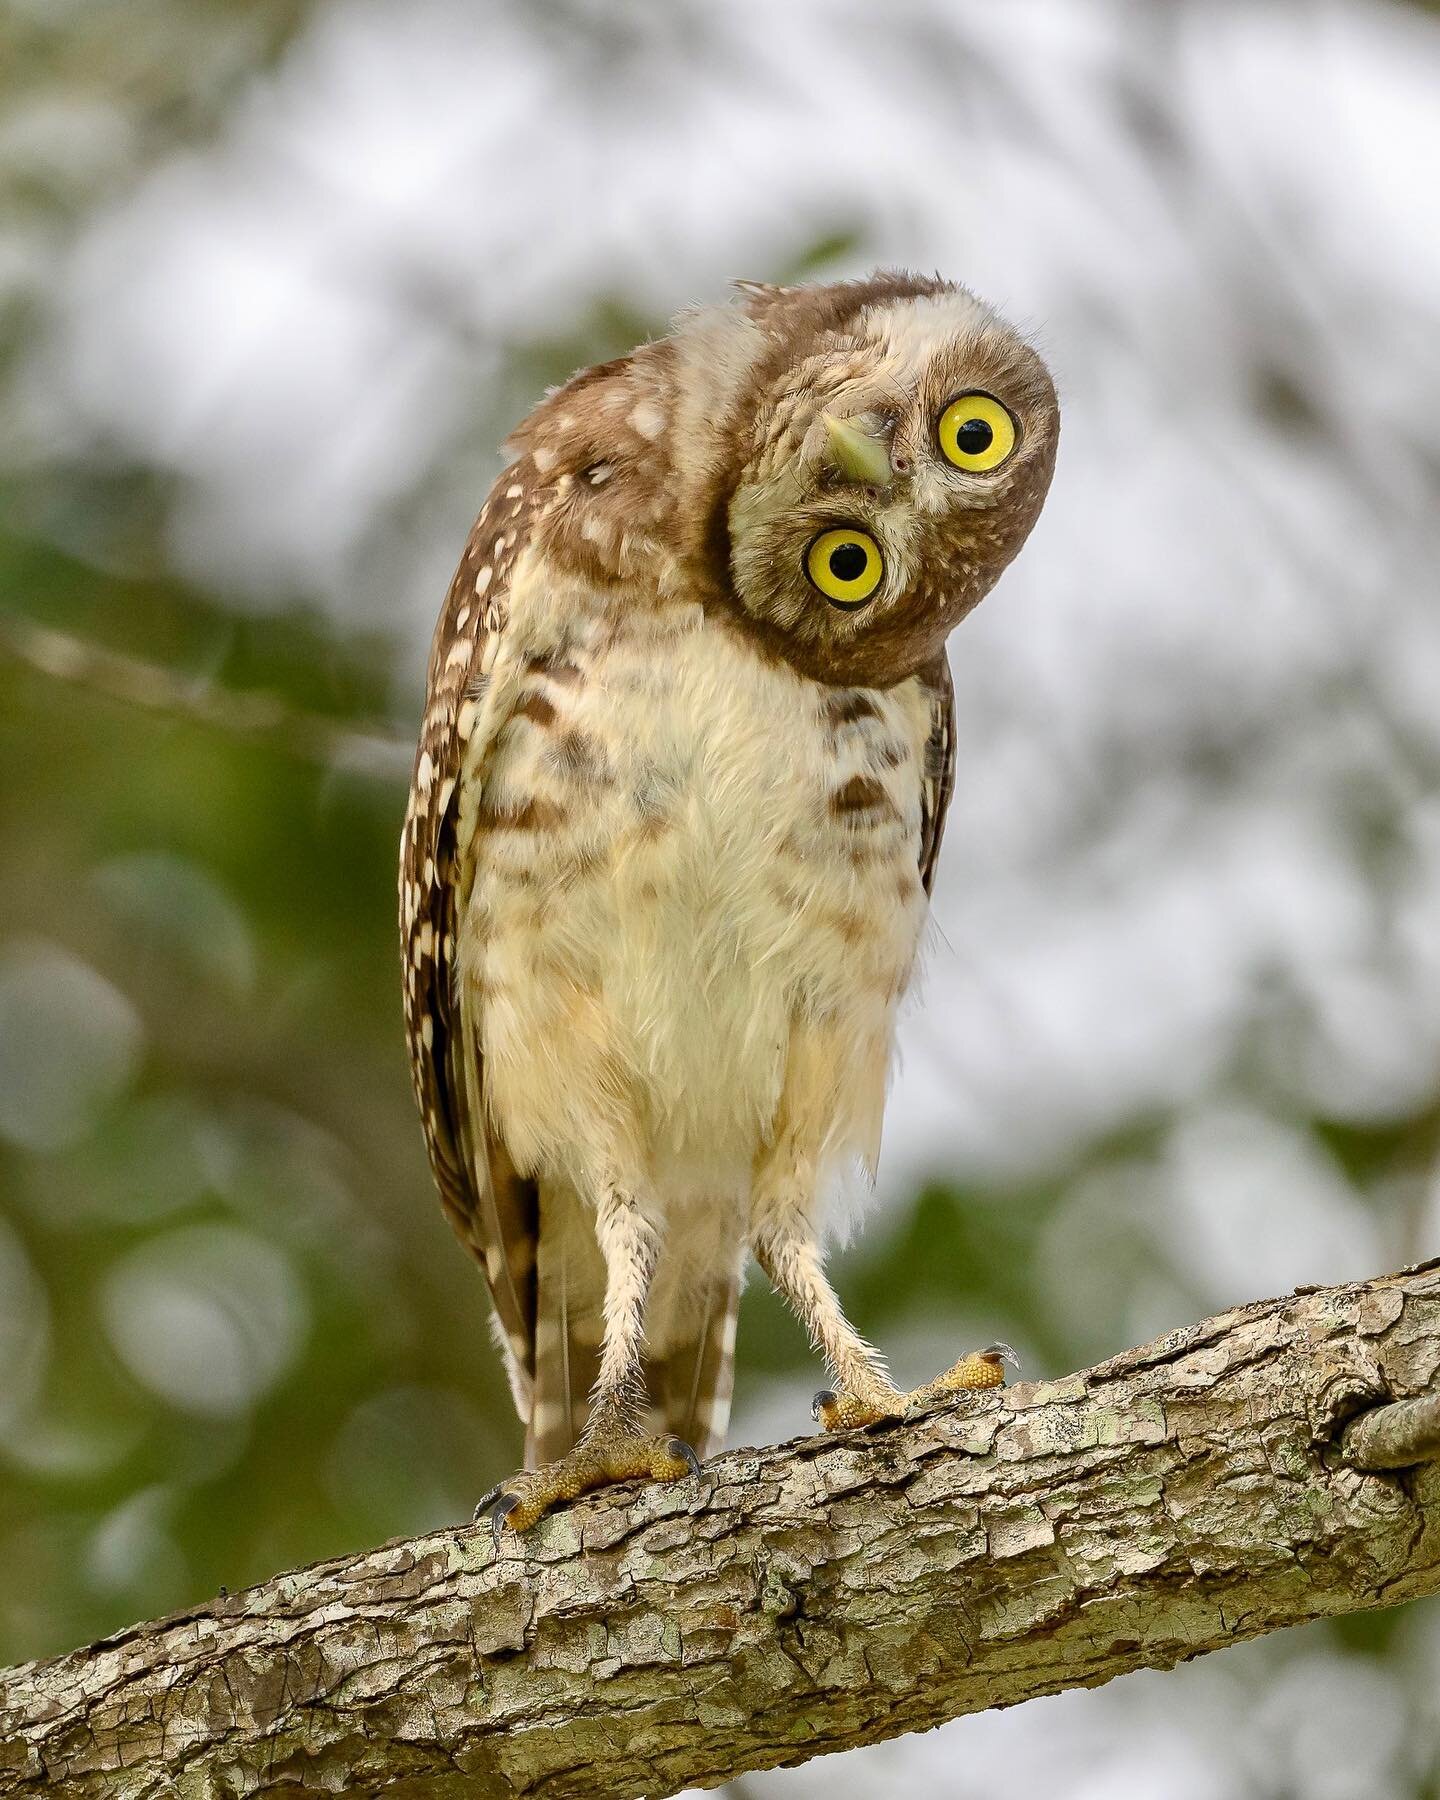 Here is a Burrowing Owlet giving me a curious look. I was amazed how far they can bend their neck. Thanks for viewing 😉 June 12, 2022

#elite_birds&nbsp;
#feather_perfection&nbsp;
#birds_perfection&nbsp;
#birds_elite&nbsp;
#raw_birds&nbsp;
#nuts_abo